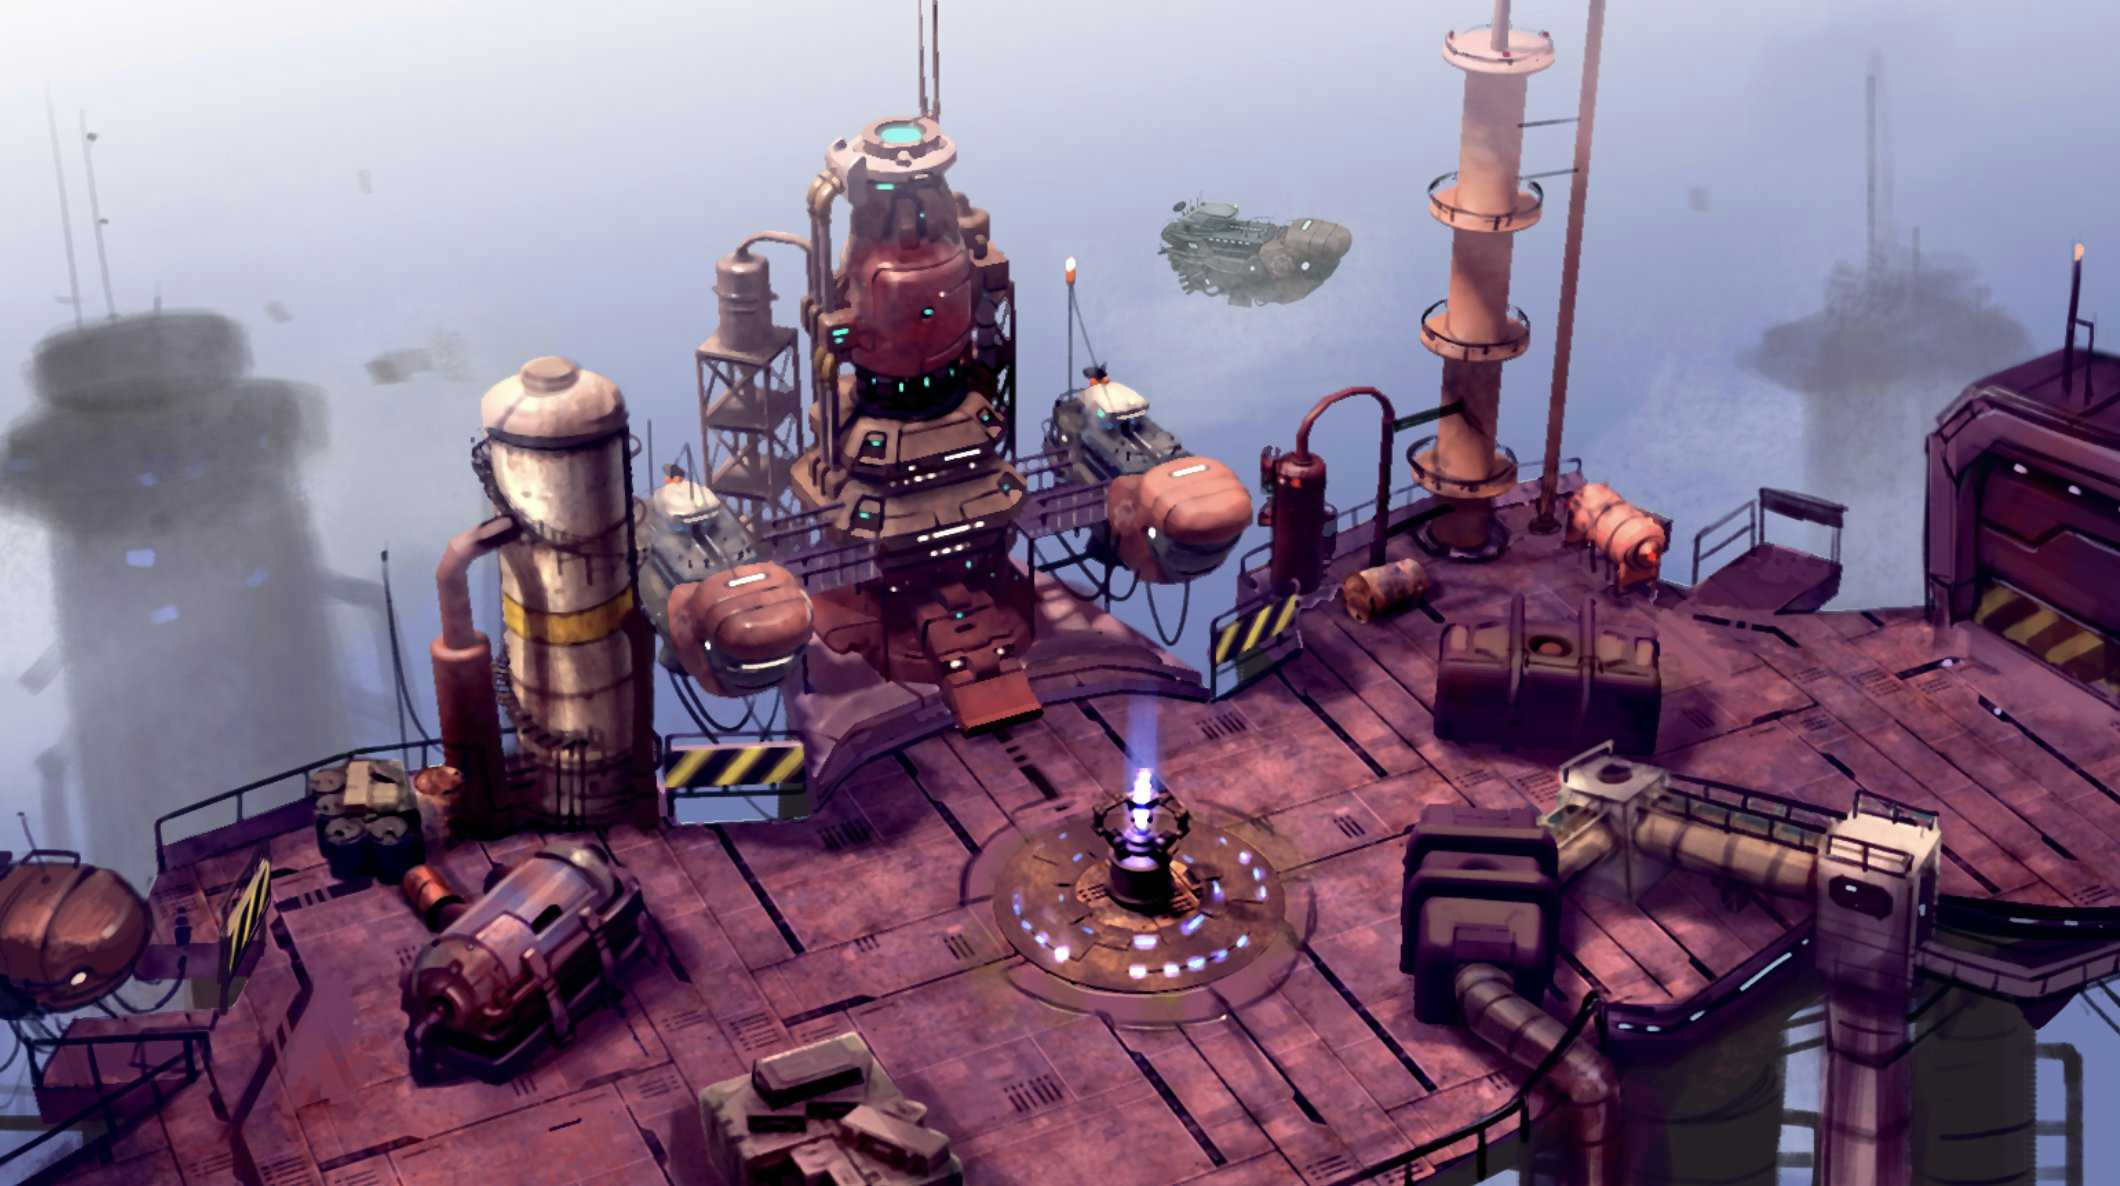 game image from ManuFactory